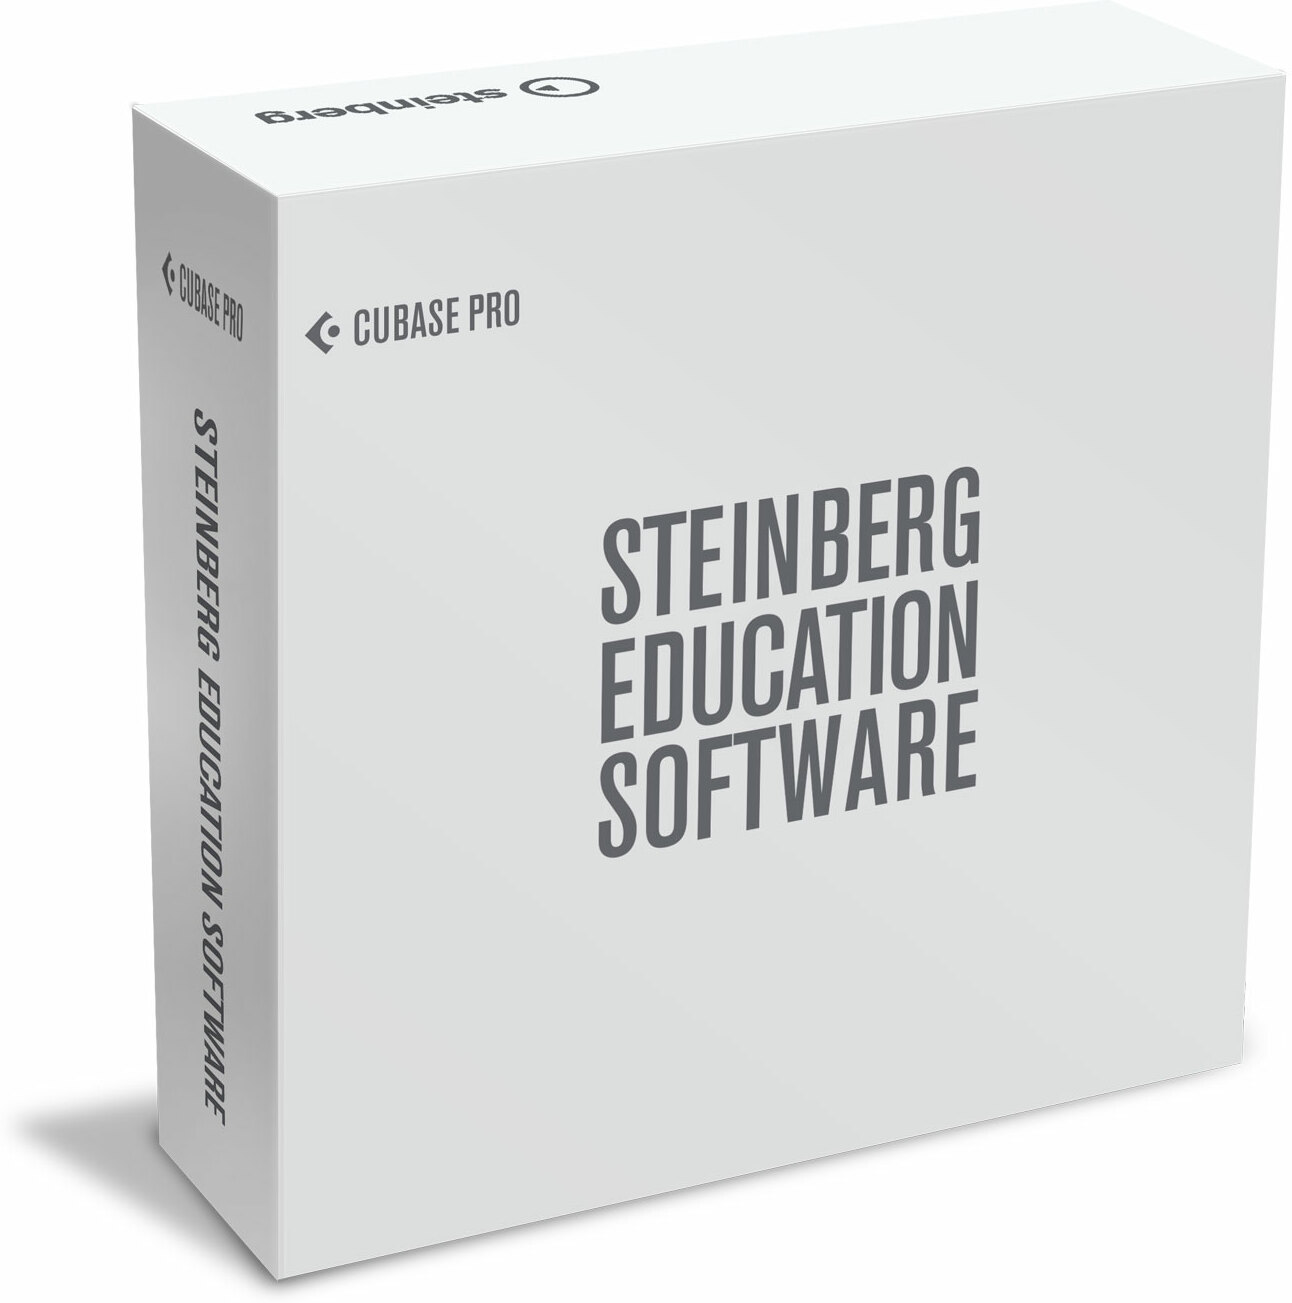 Steinberg Cubase Pro 10.5 Education - Sequencer sofware - Main picture